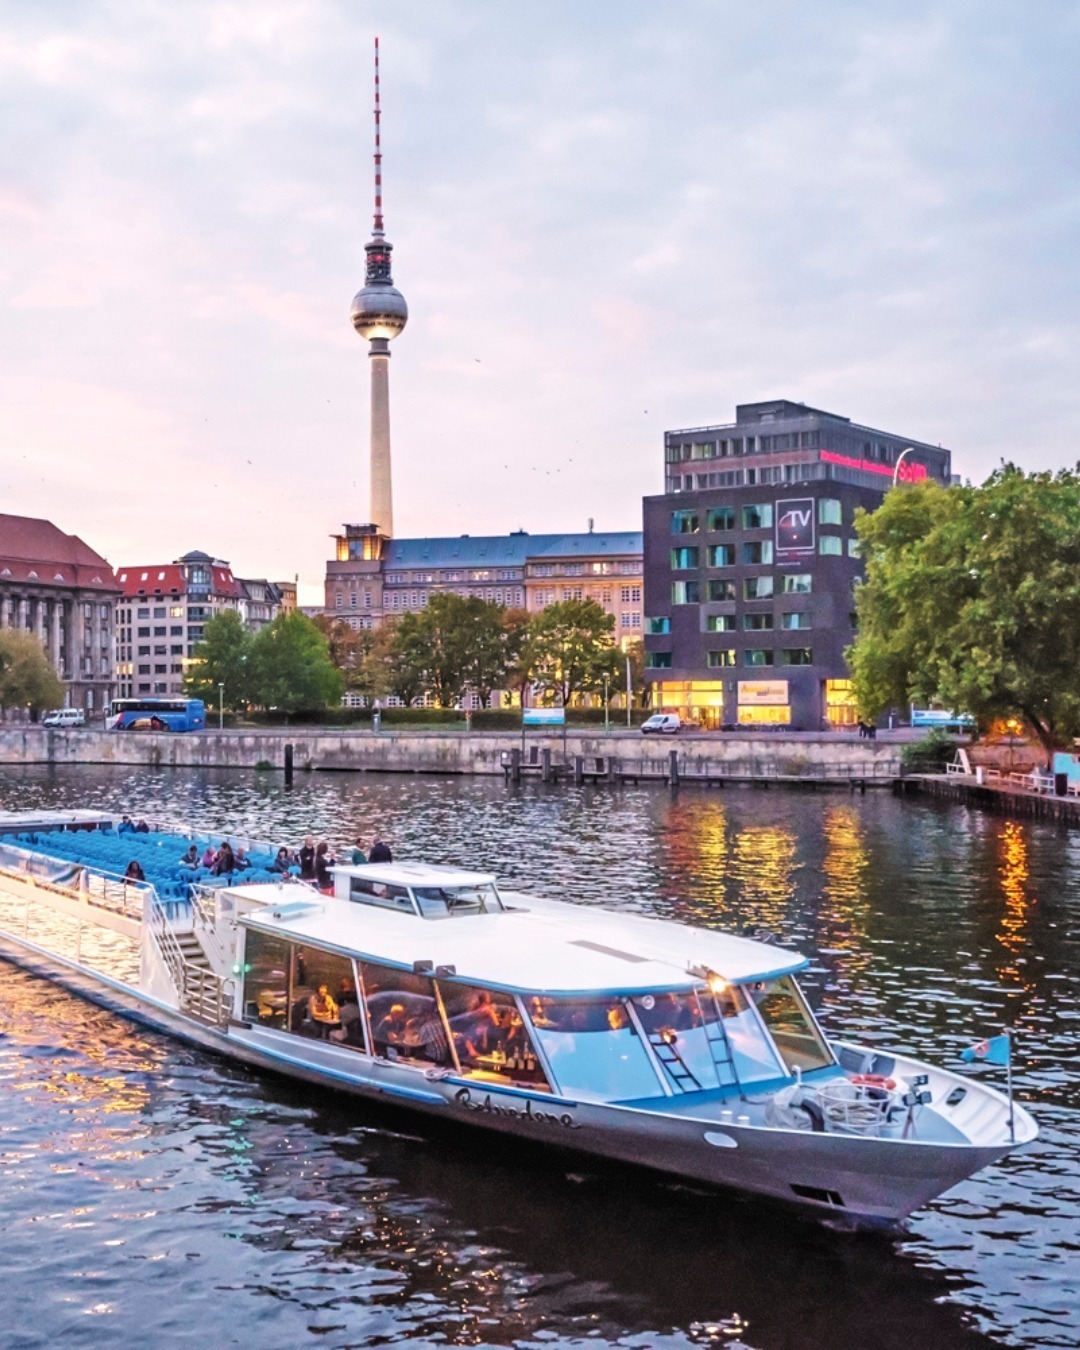 Best things to do in summer in Berlin ☀️🍦

1. Cruise on the river Spree. The best way to combine city sightseeing with relaxing in the sun. 
2. Have a drink at a Biergarten. The best-known beer garden to those visiting from outside the city is @cafeamneuensee in Tiergarten. 
3. Go for a traditional swim in Strandbad Wansee in Zehlendorf. Berliners love to come here to enjoy the beach chairs, water slides, play beach volleyball and football.
4. Catch the sunset from the @berliner_fernsehturm at Alexanderplatz. At 203 metres above the ground, you can enjoy panoramic views across the city.
5. Cool down at the @berlinicebar. The bar is kept at a constant -10°C, you’ll be glad for the down jacket and gloves to protect you from the ice in the coolest bar in town.
6. Watch a movie in the open air @freiluftkinokreuzberg . There is nothing quite like watching a movie under the stars on a warm summer night and Berlin has plenty of options to enjoy this phenomenon. 

📸 2 & 6 : @cafeamneuensee & @freiluftkinokreuzberg 

#citysightseeingberlin #whattodoinberlin #berlinmustdo #berlinmustsee #discoverberlin #berlintips #berlin #berlinactivities #thingstodoinberlin #brandenburggate #spreerivercruise #tvtowerberlin #berlintheplacetobe #visitberlin